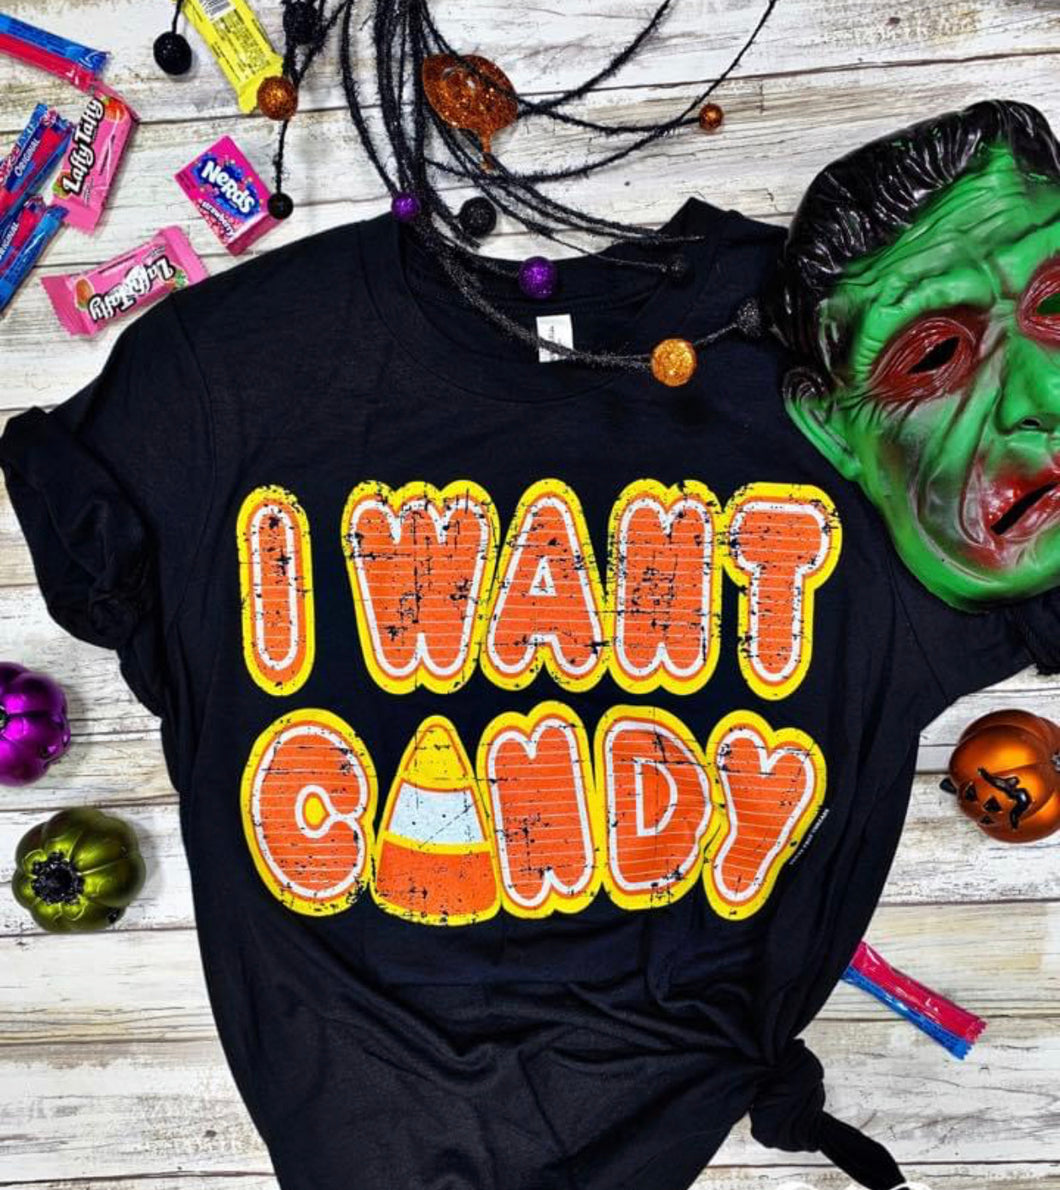 I Want Candy Tee